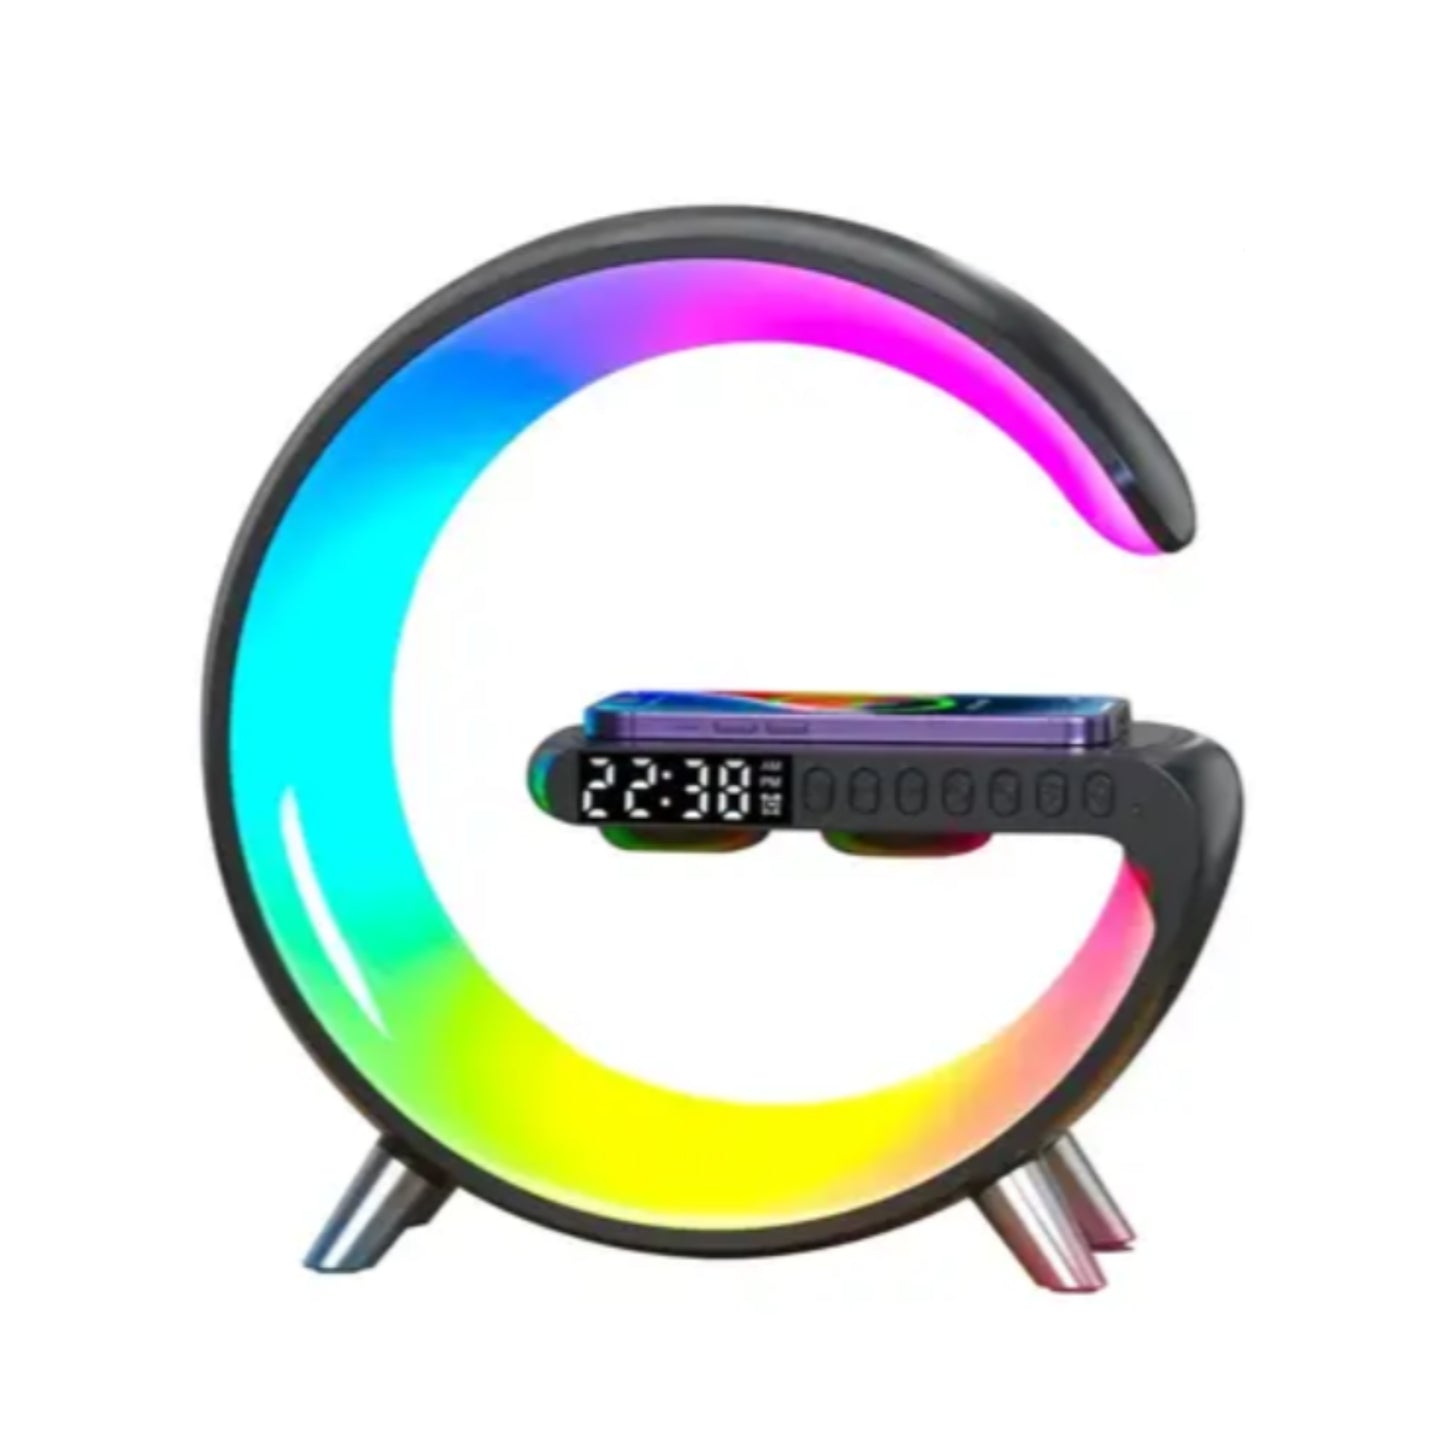 Ministry Nap™ Stand Alarm Clock